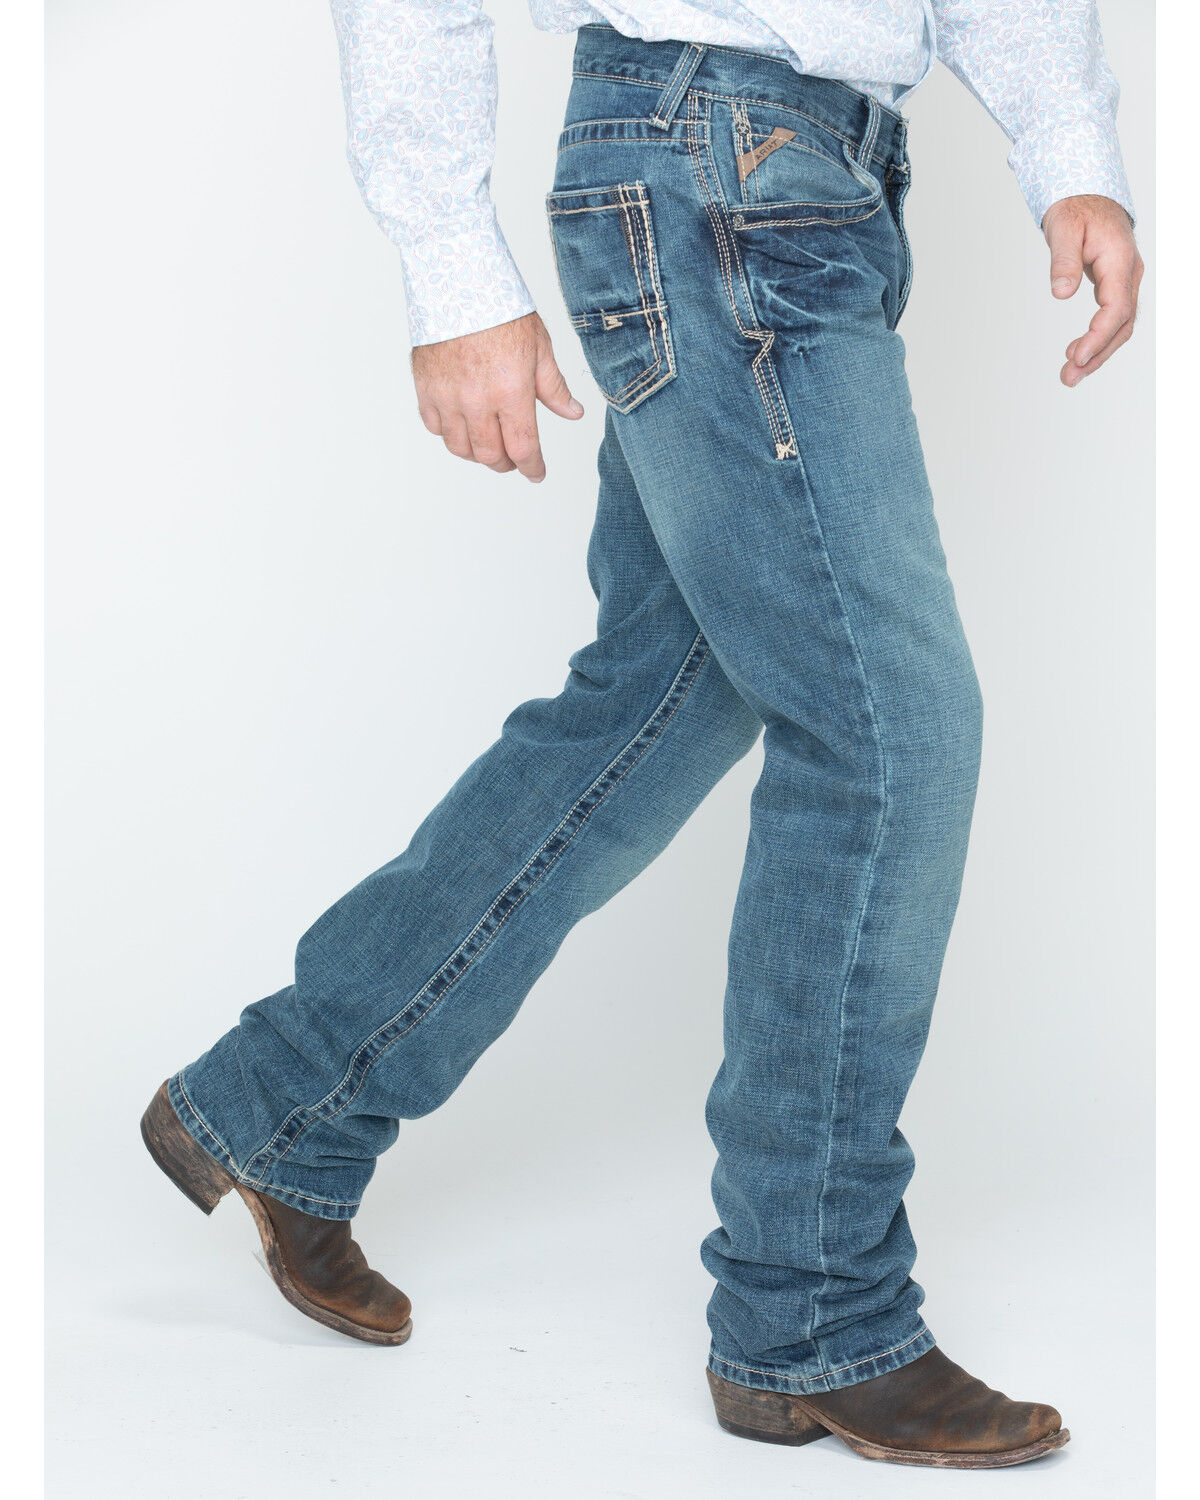 ariat m5 jeans on sale